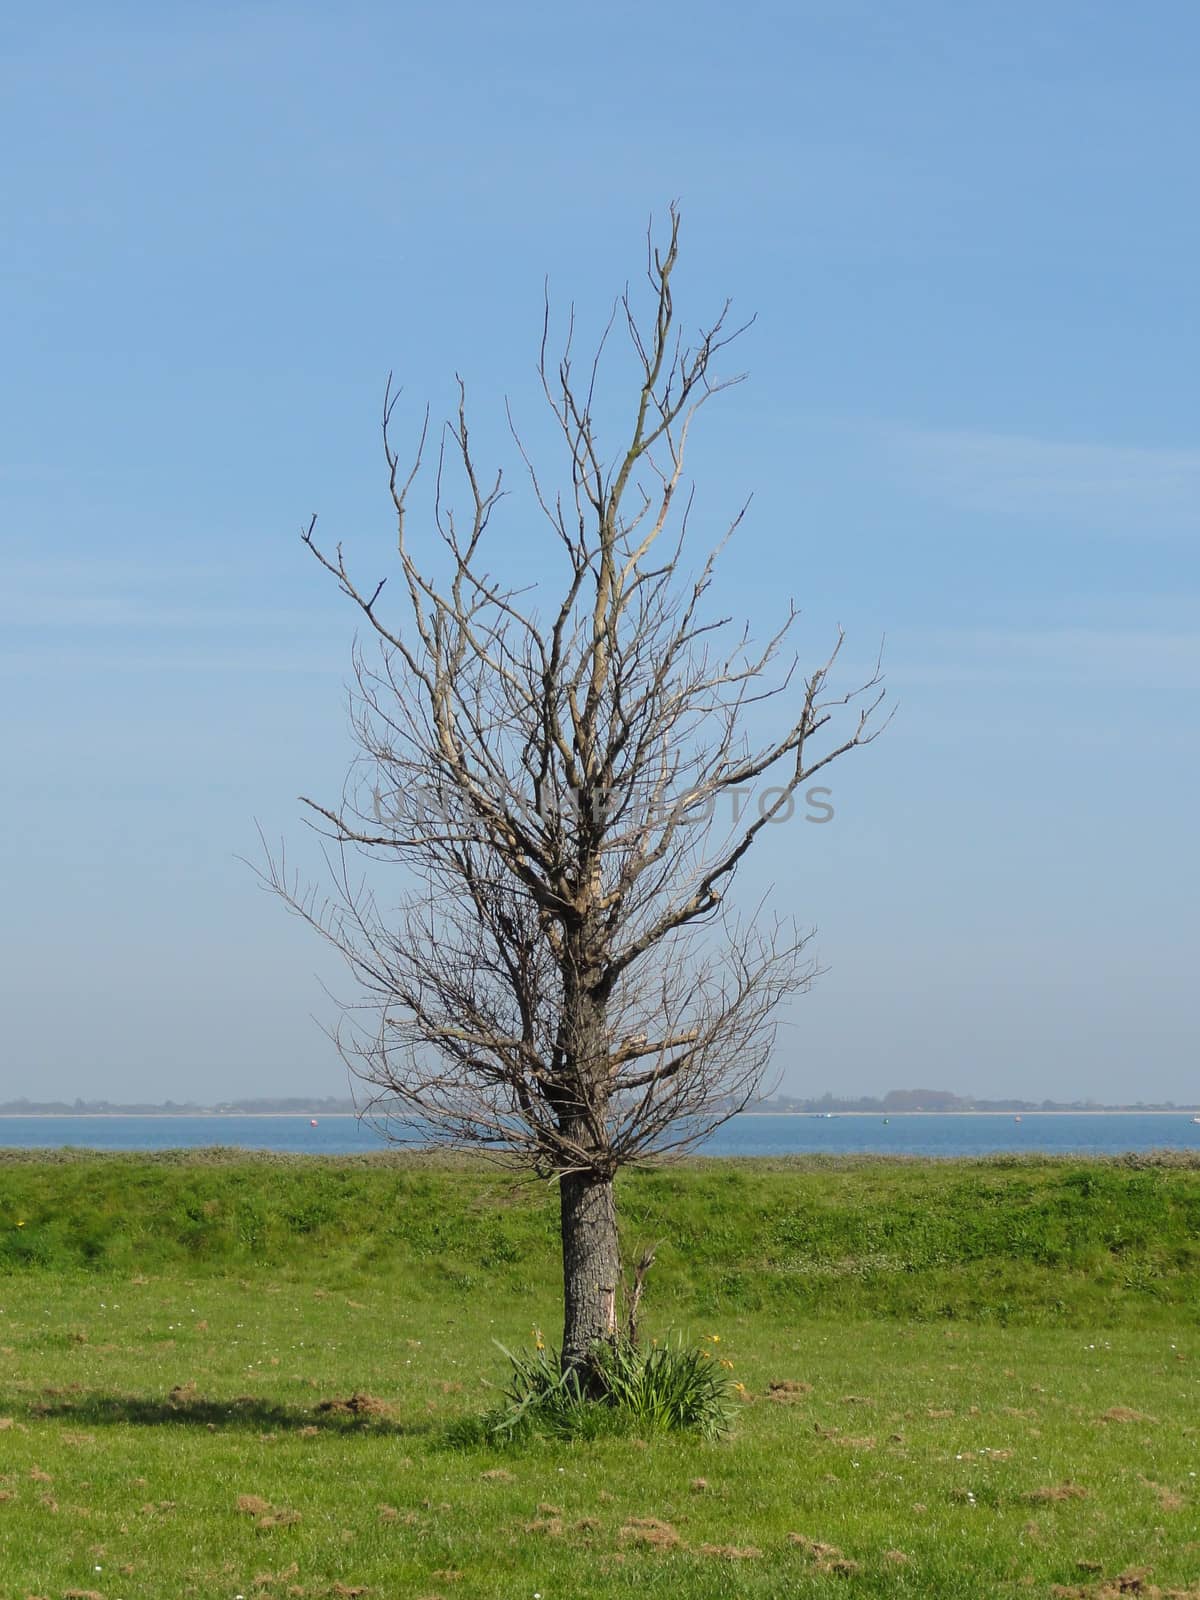 Isolated bare tree on grass with shoreline in the background